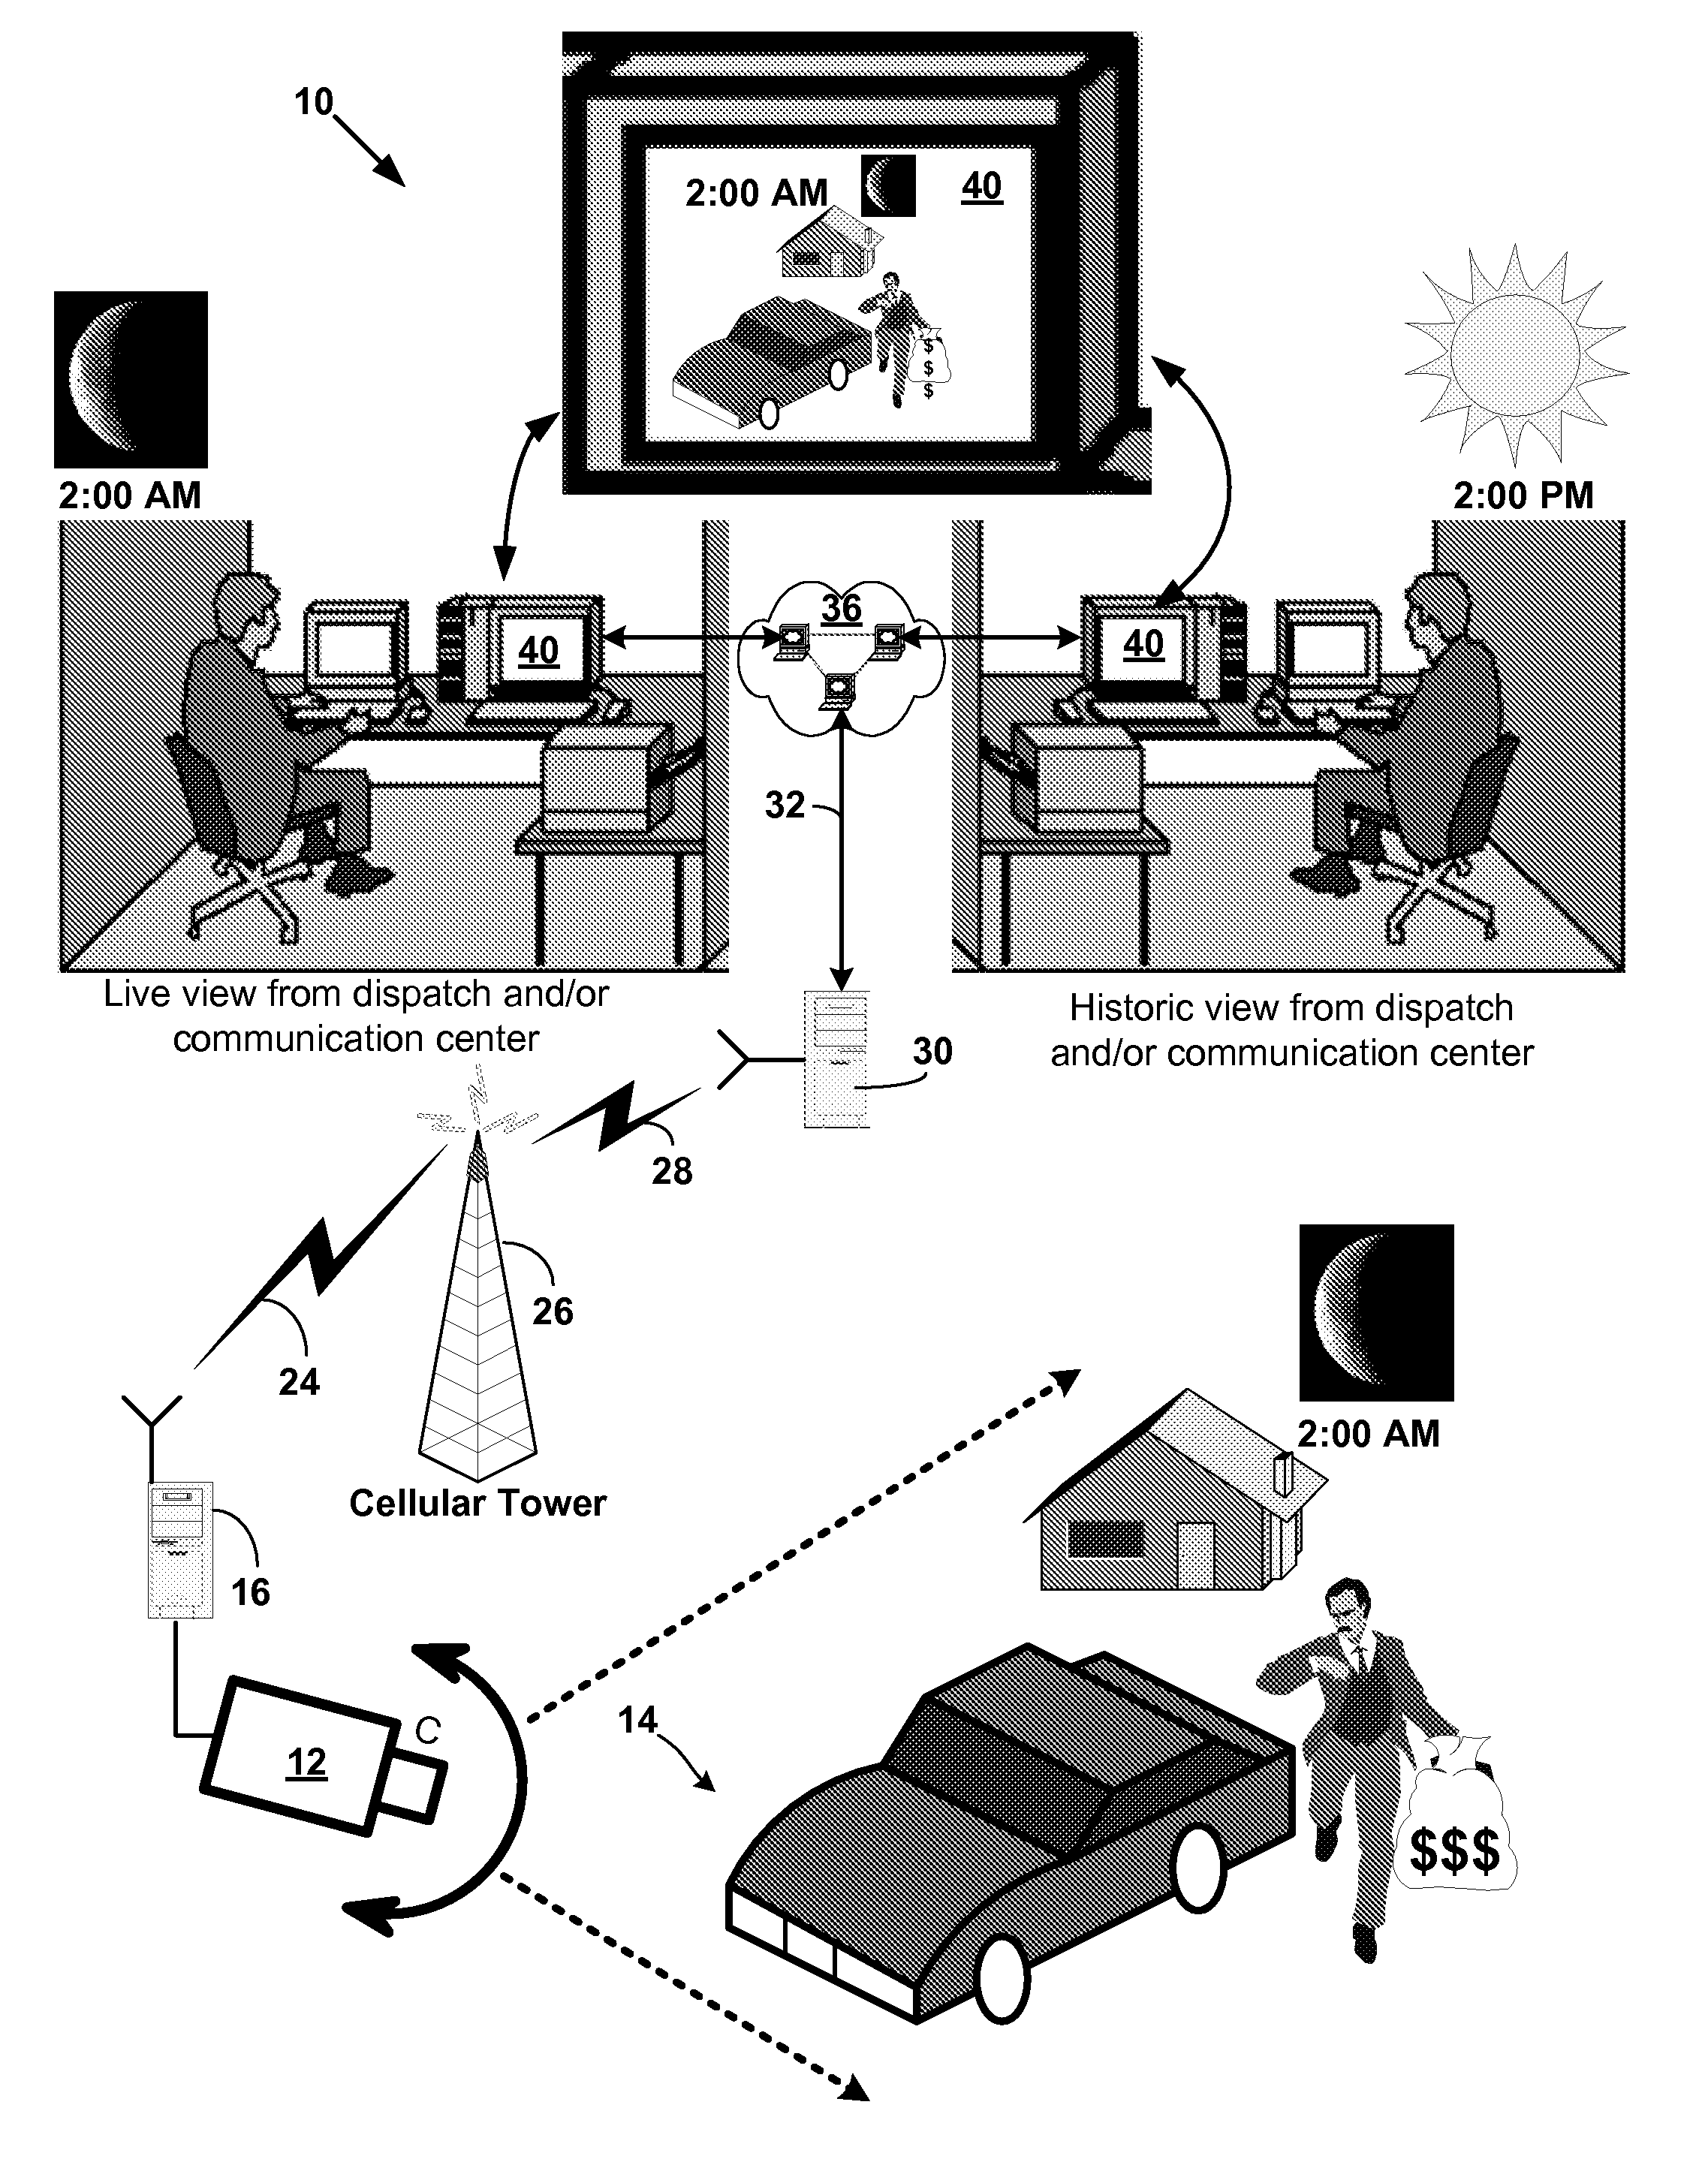 System and method for remote surveillance